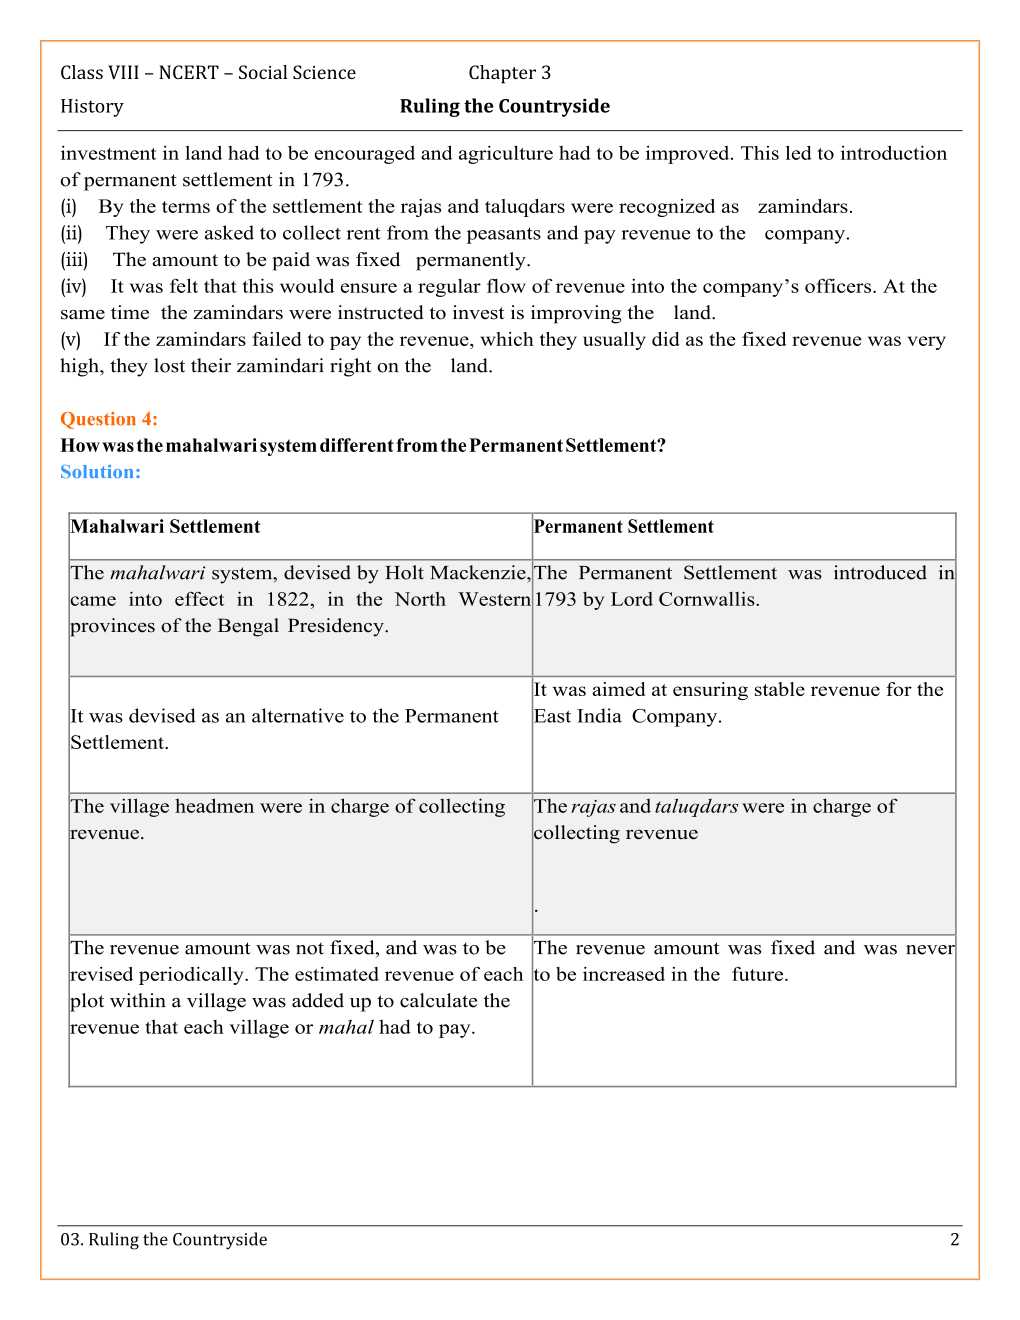 NCERT Solutions For Class 8 Social Science Our Pasts 3 Chapter 3